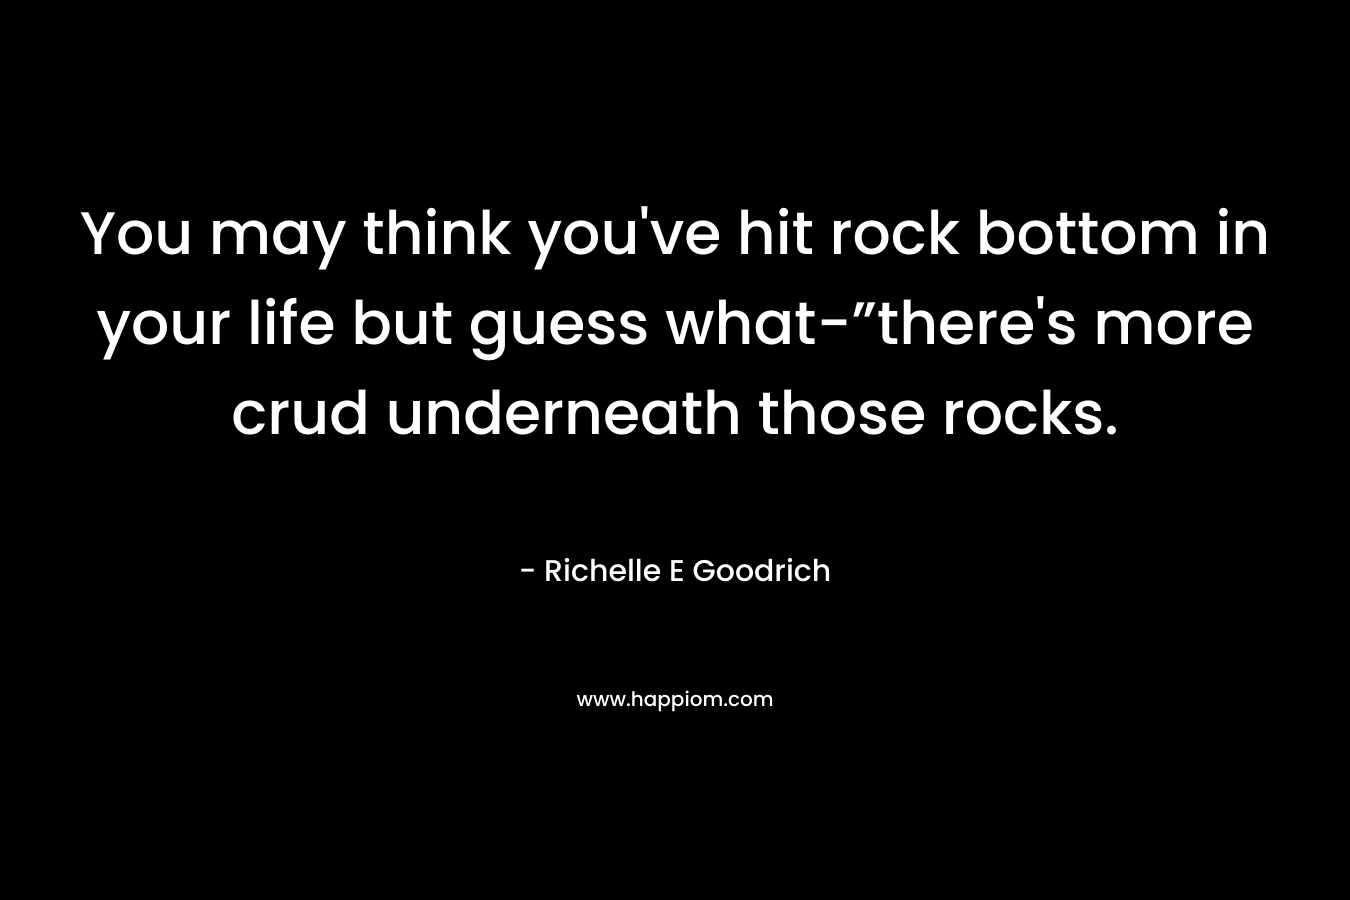 You may think you've hit rock bottom in your life but guess what-”there's more crud underneath those rocks.